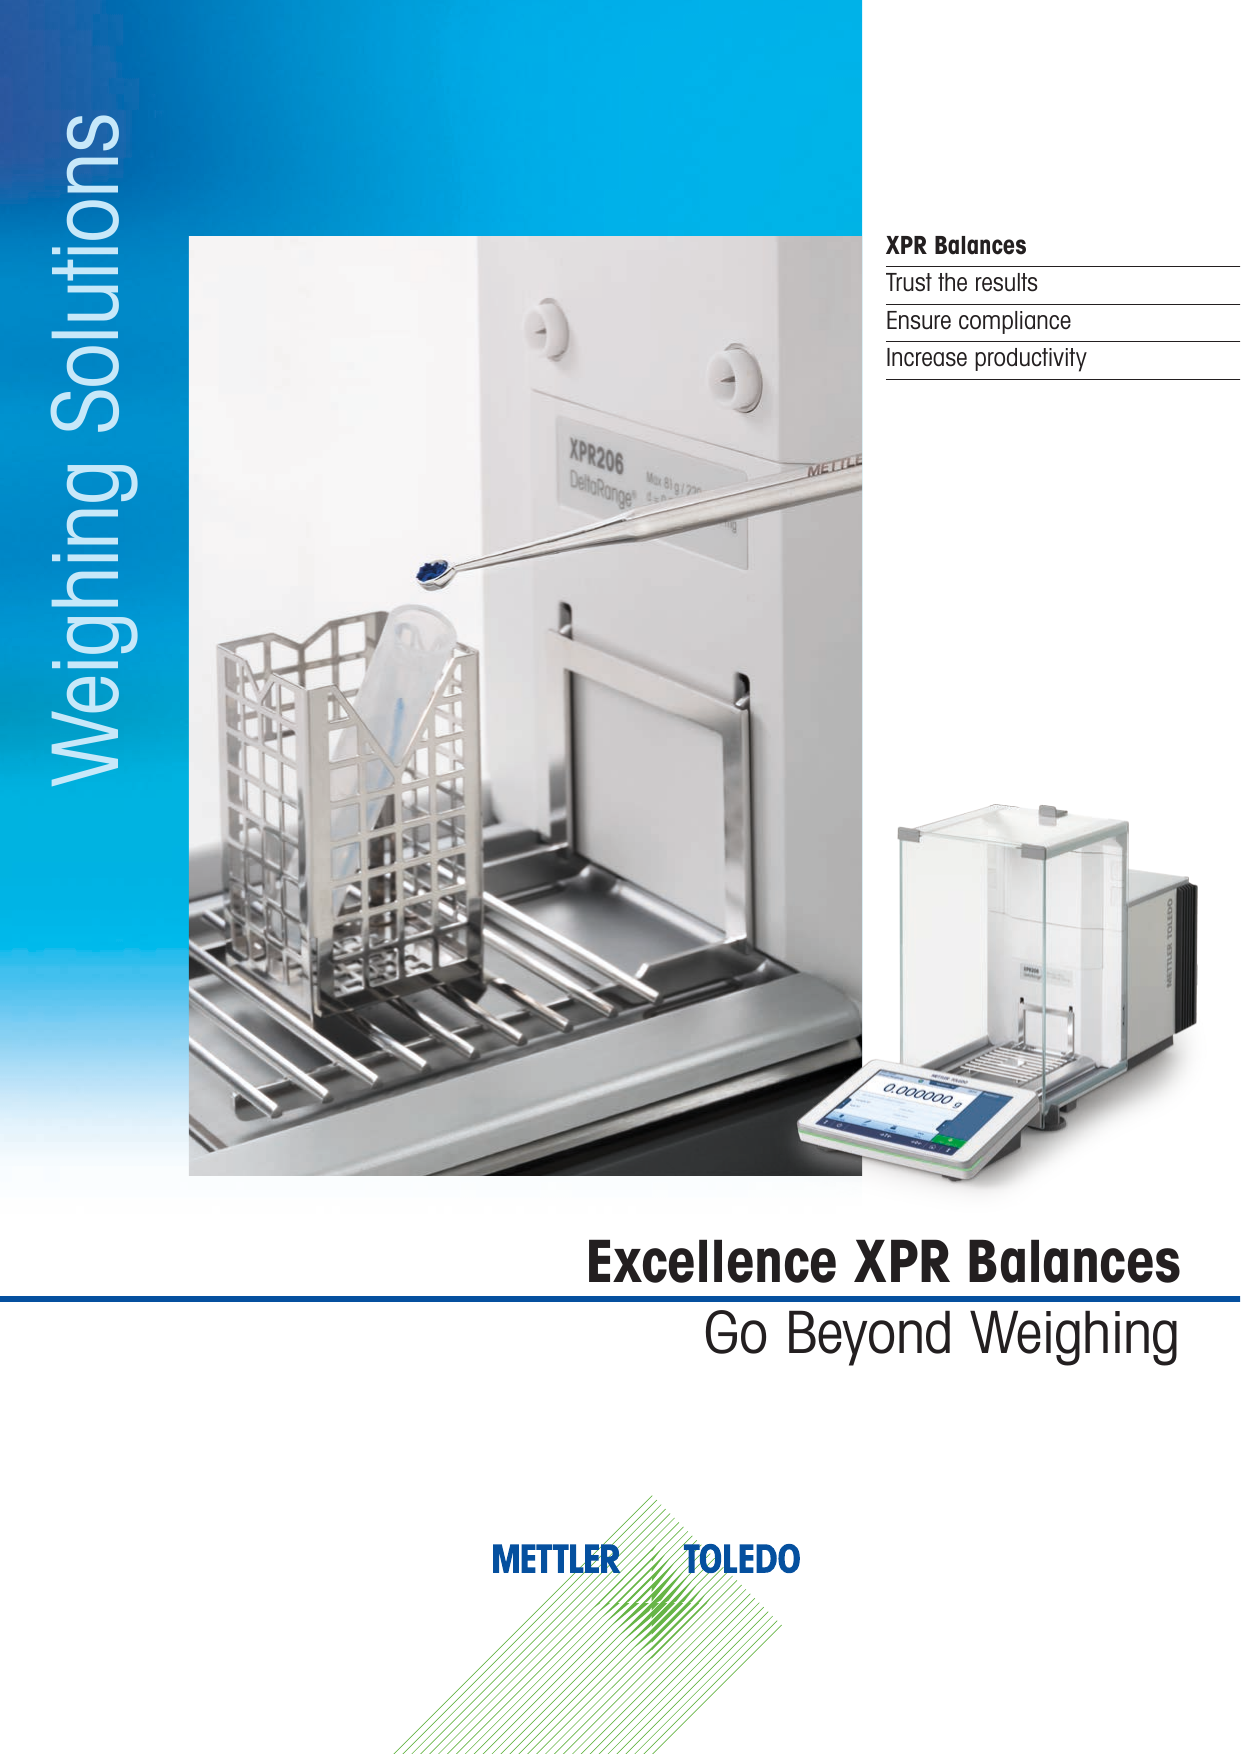 XPR BalancesTrust the resultsEnsure complianceIncrease productivityExcellence XPR Balances Go Beyond WeighingWeighing Solutions